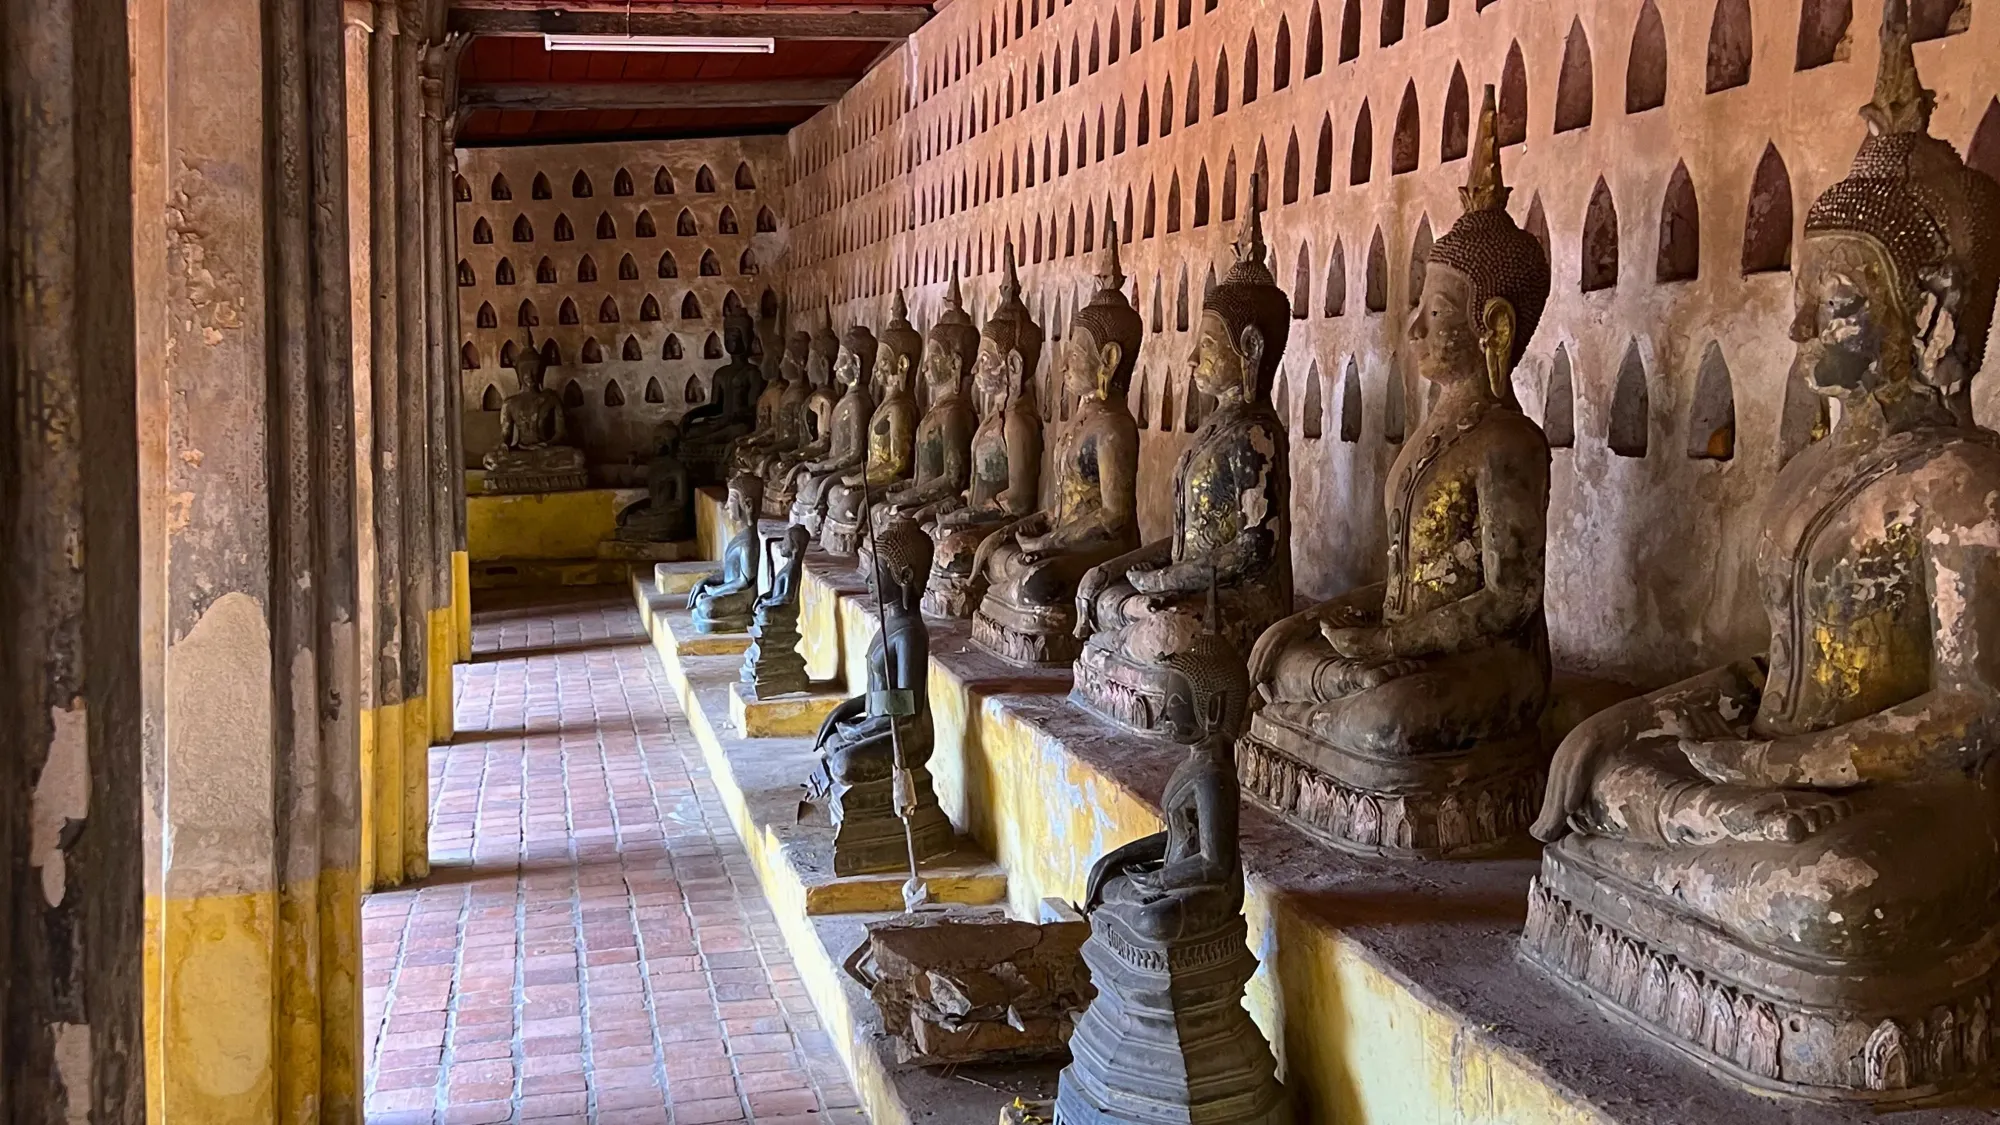 Successive seated buddha statues lined up on a bench in the temple